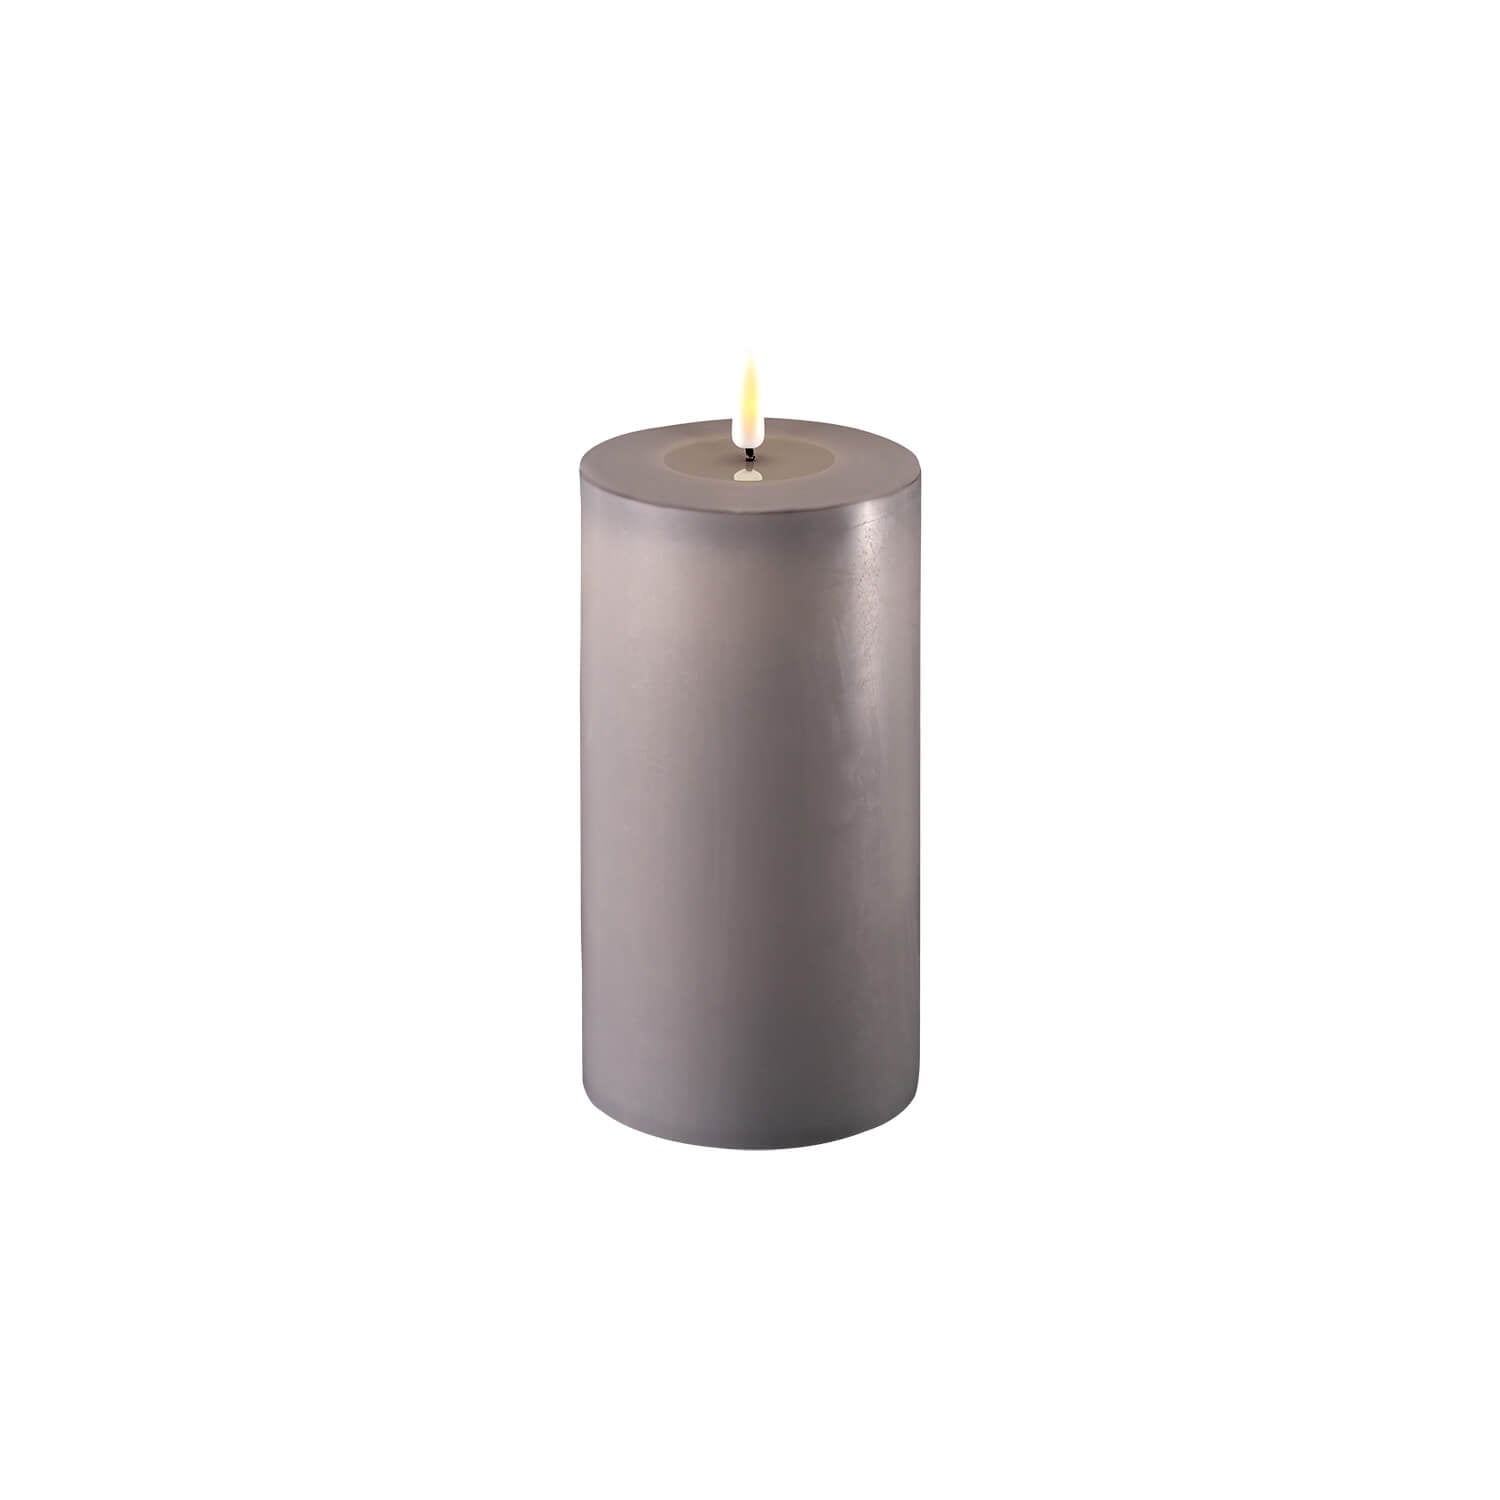 The Home Collection Deluxe LED Candle 10cm x 20cm - Grey 1 Shaws Department Stores